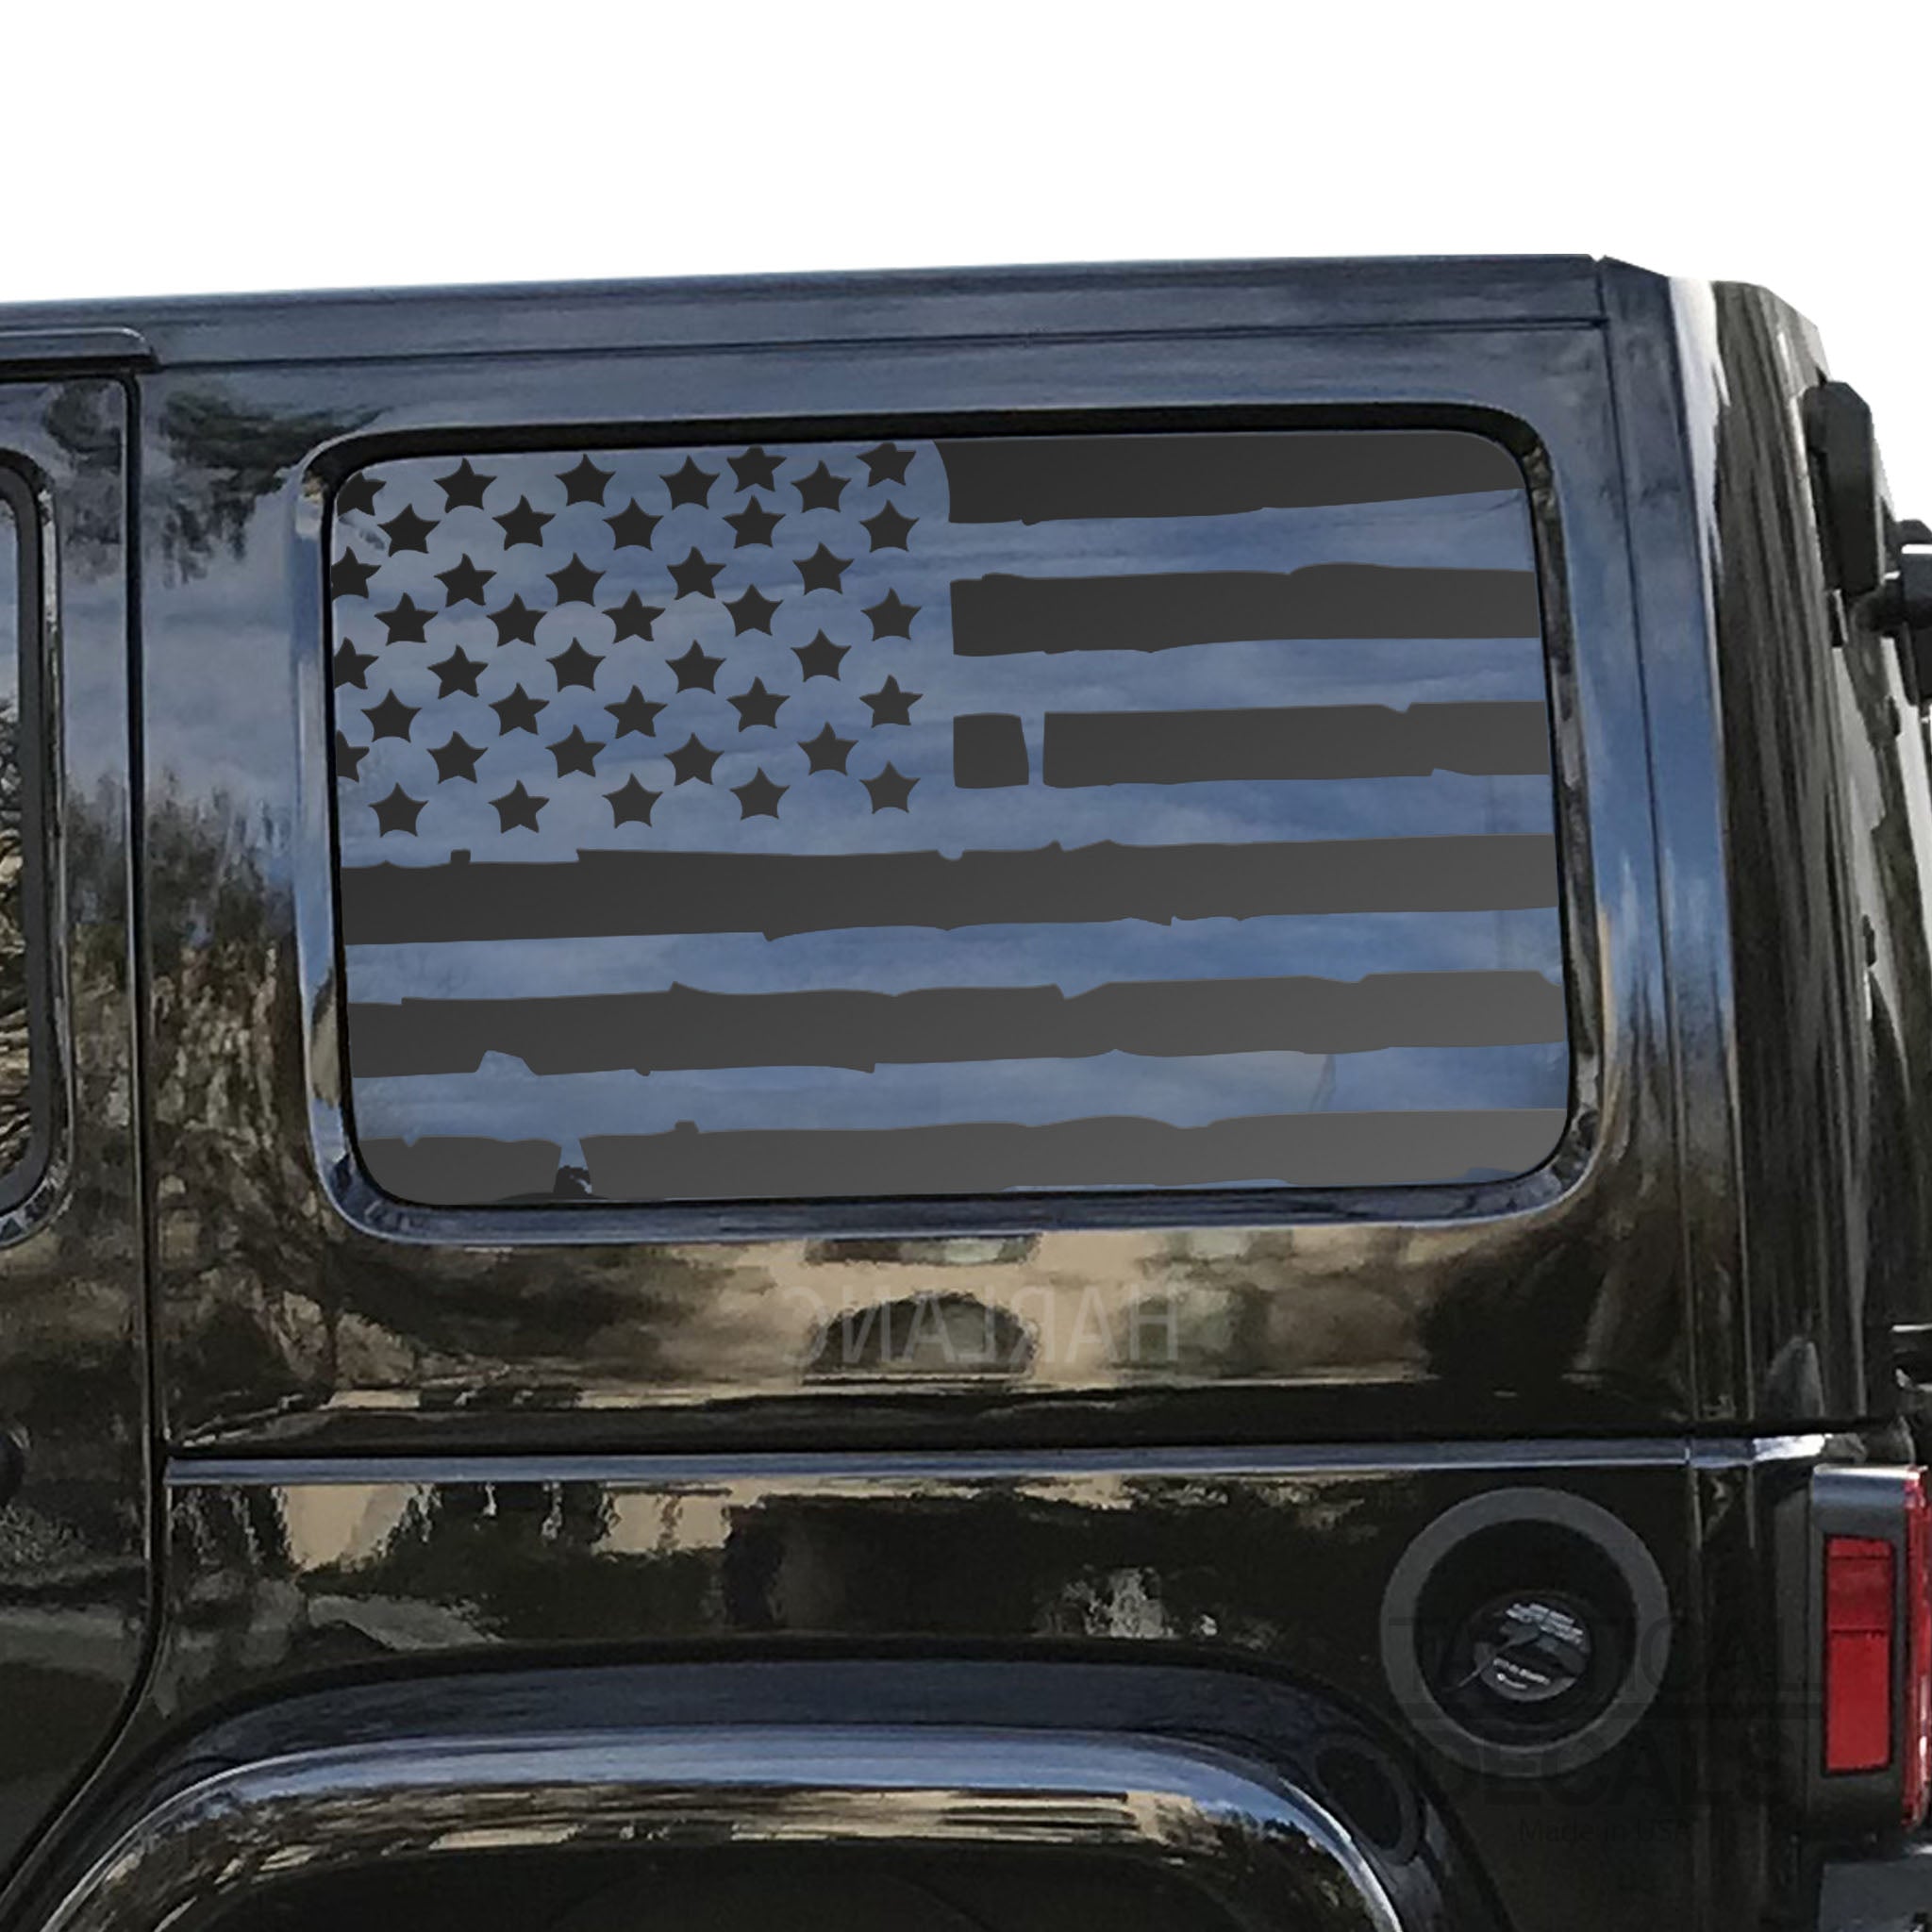 Distressed USA Flag Decal for 2007 - 2020 Jeep Wrangler 4 Door only - –  Tactical Decals